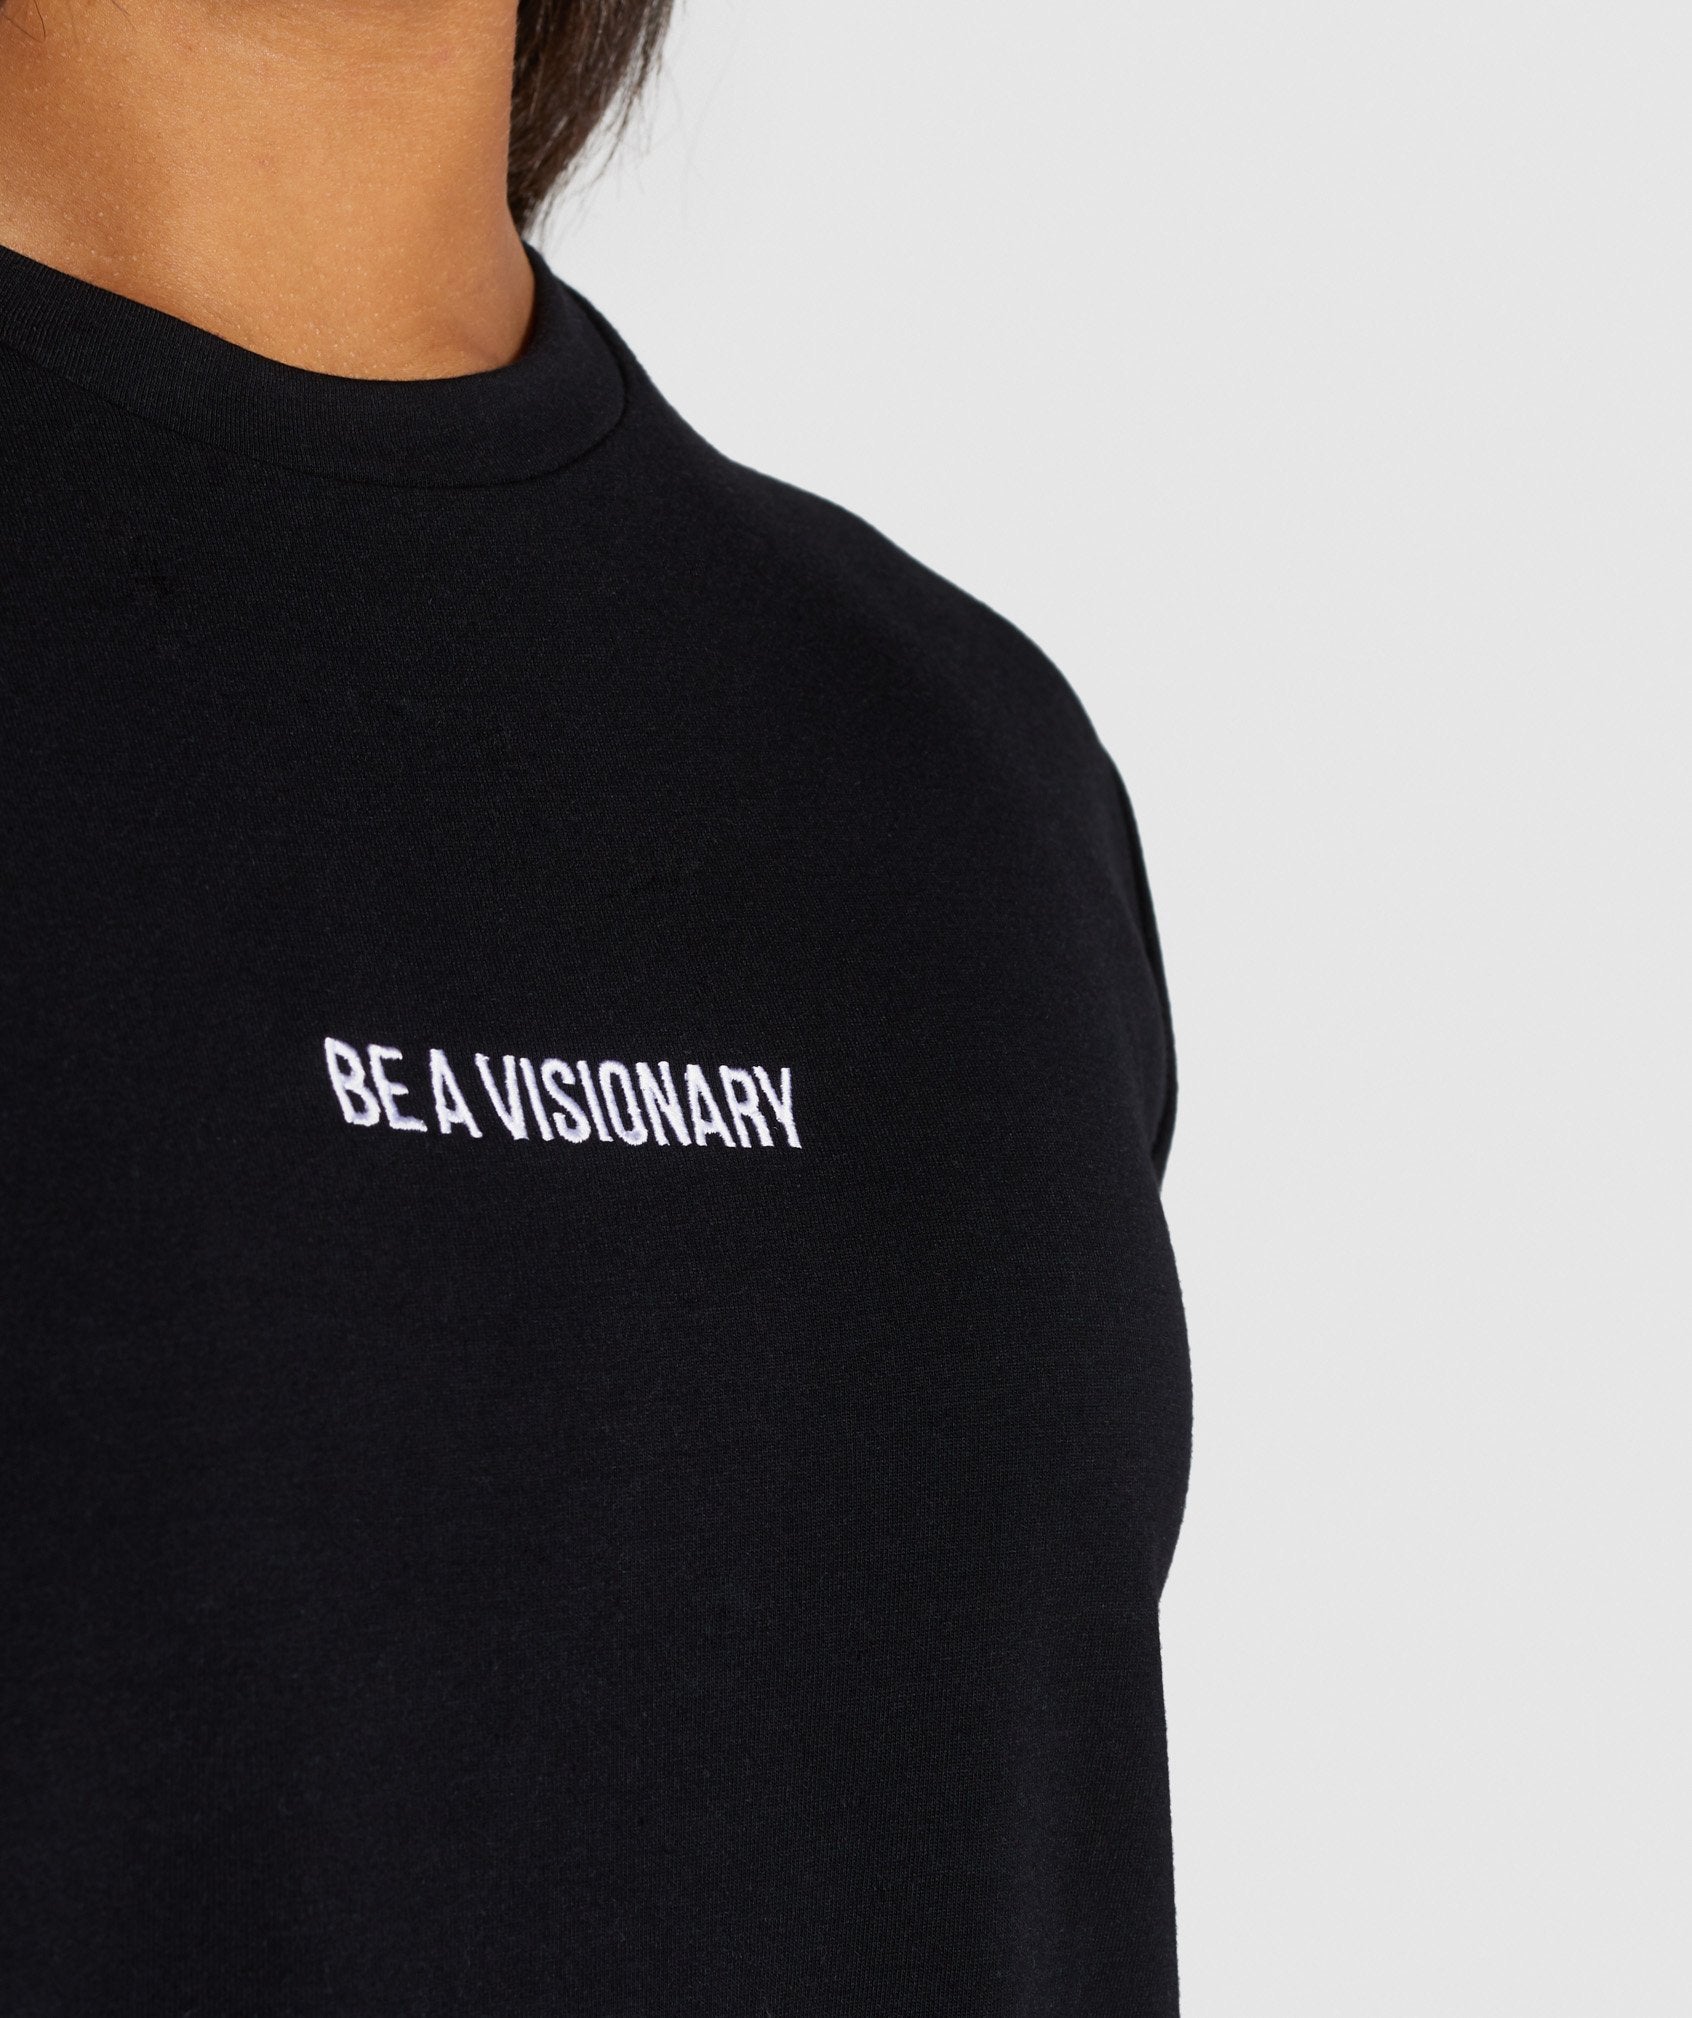 Essential Be a Visionary Tee in Black - view 4